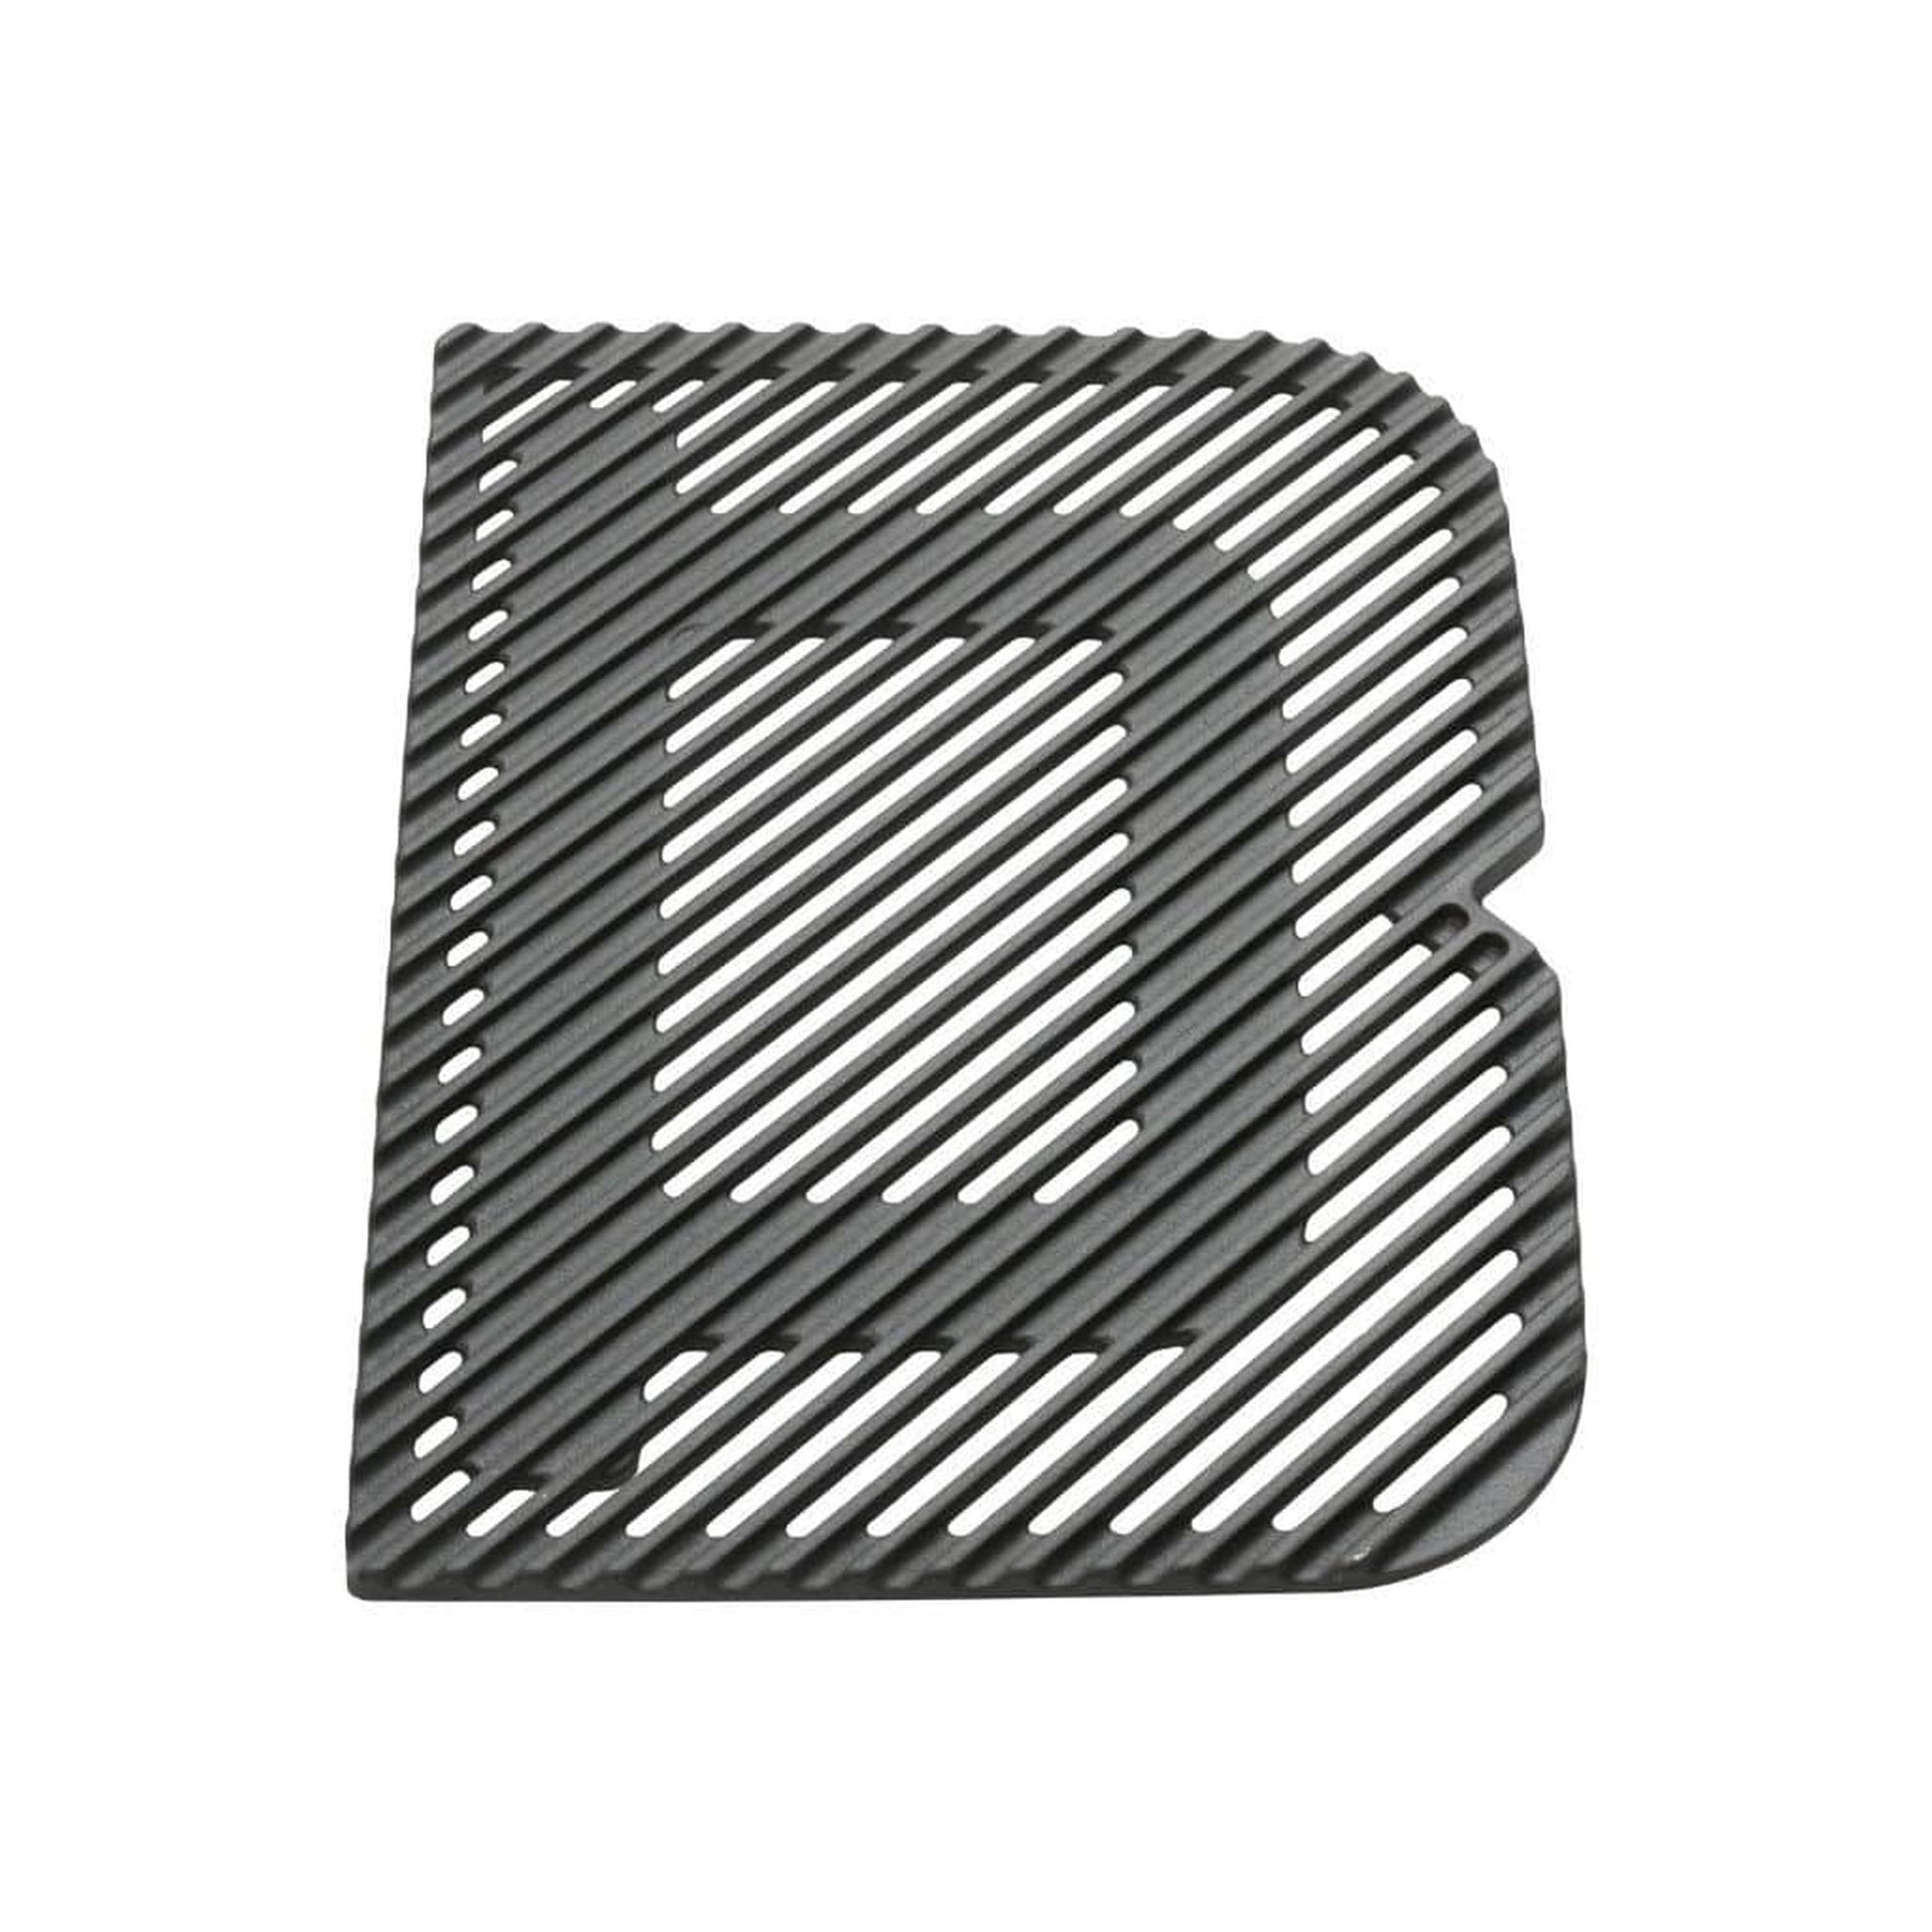 Everdure Cast Iron Grill Plate for 46" FORCE™ Gas Grill (Left/Right)